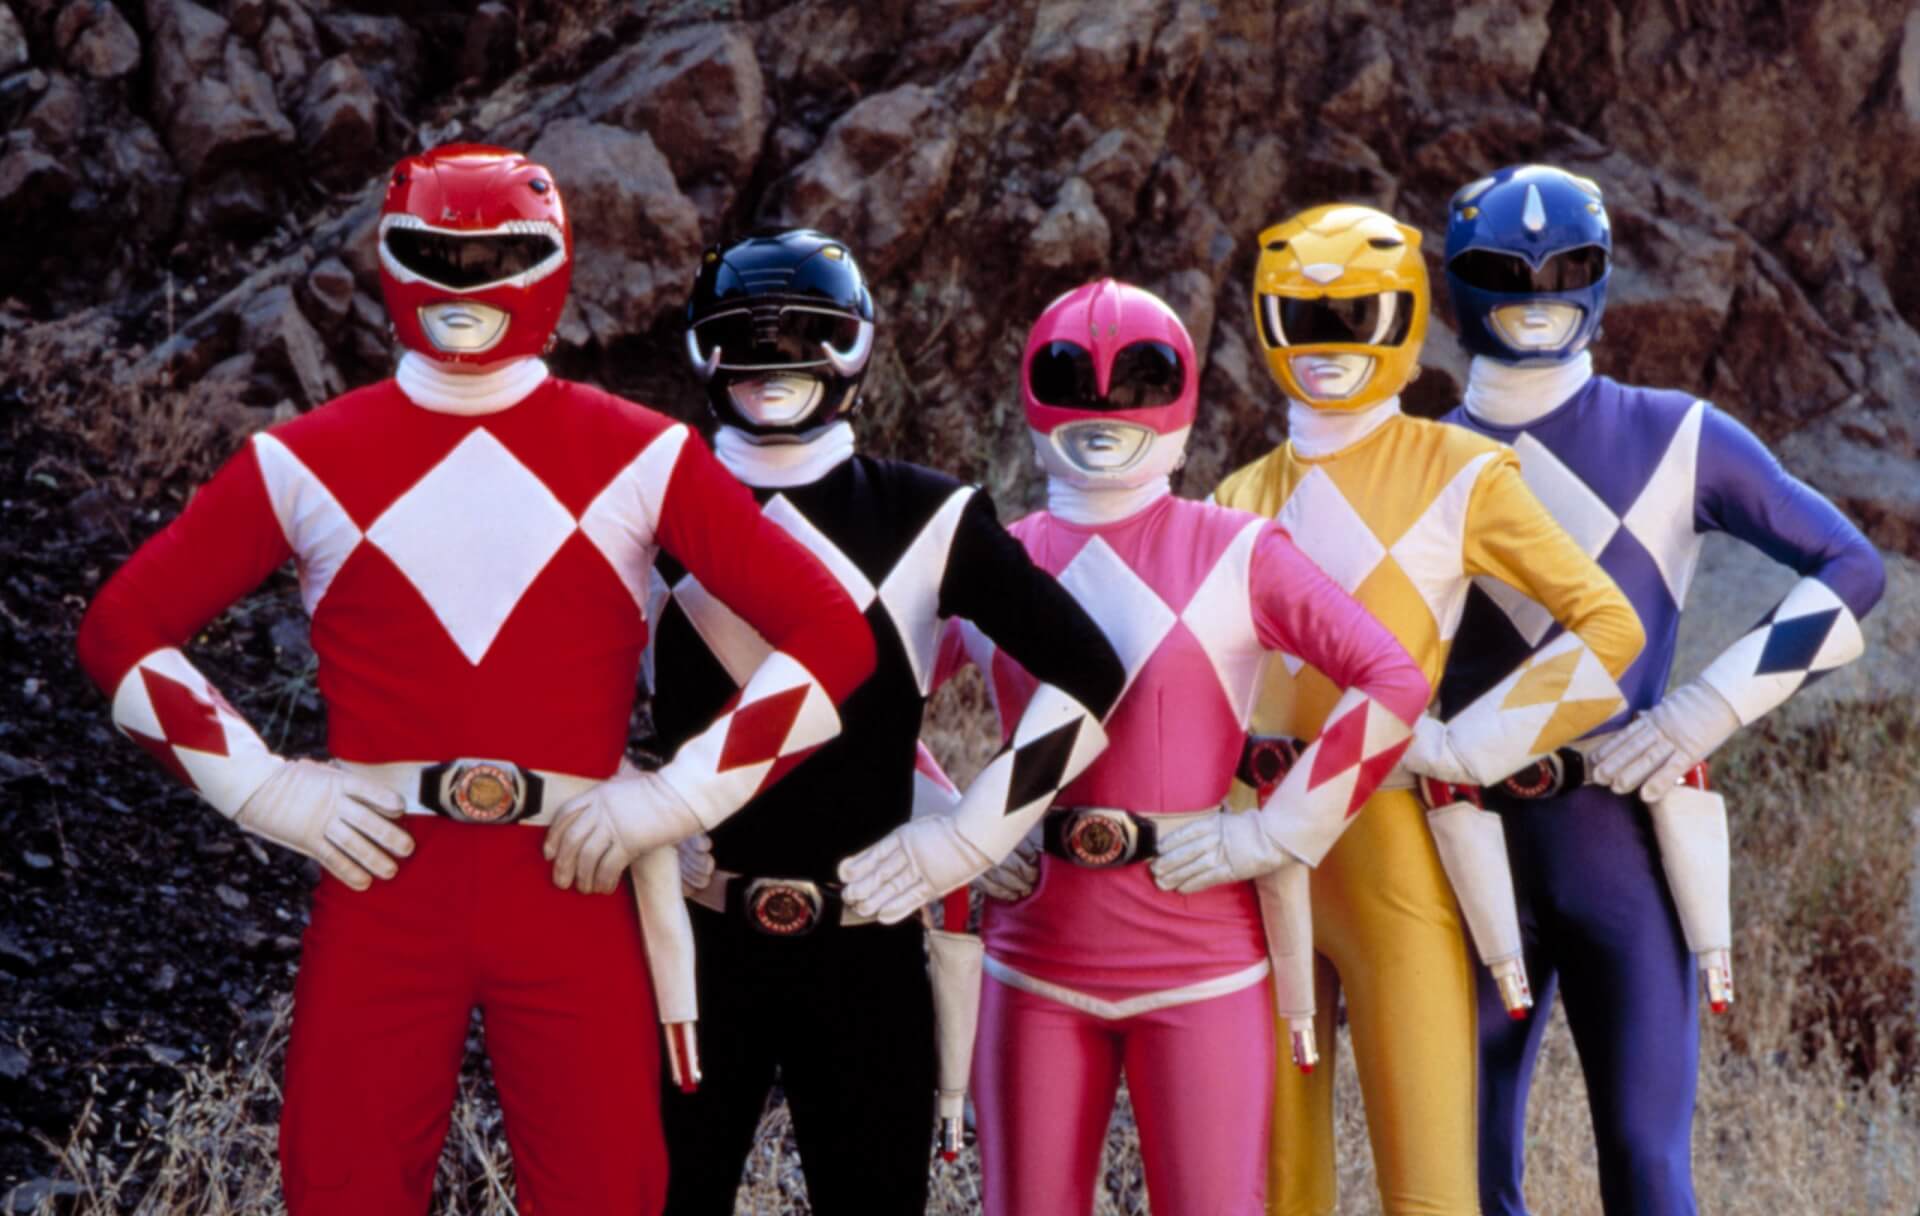 Netflix has stopped working on an adaptation of the Power Rangers series